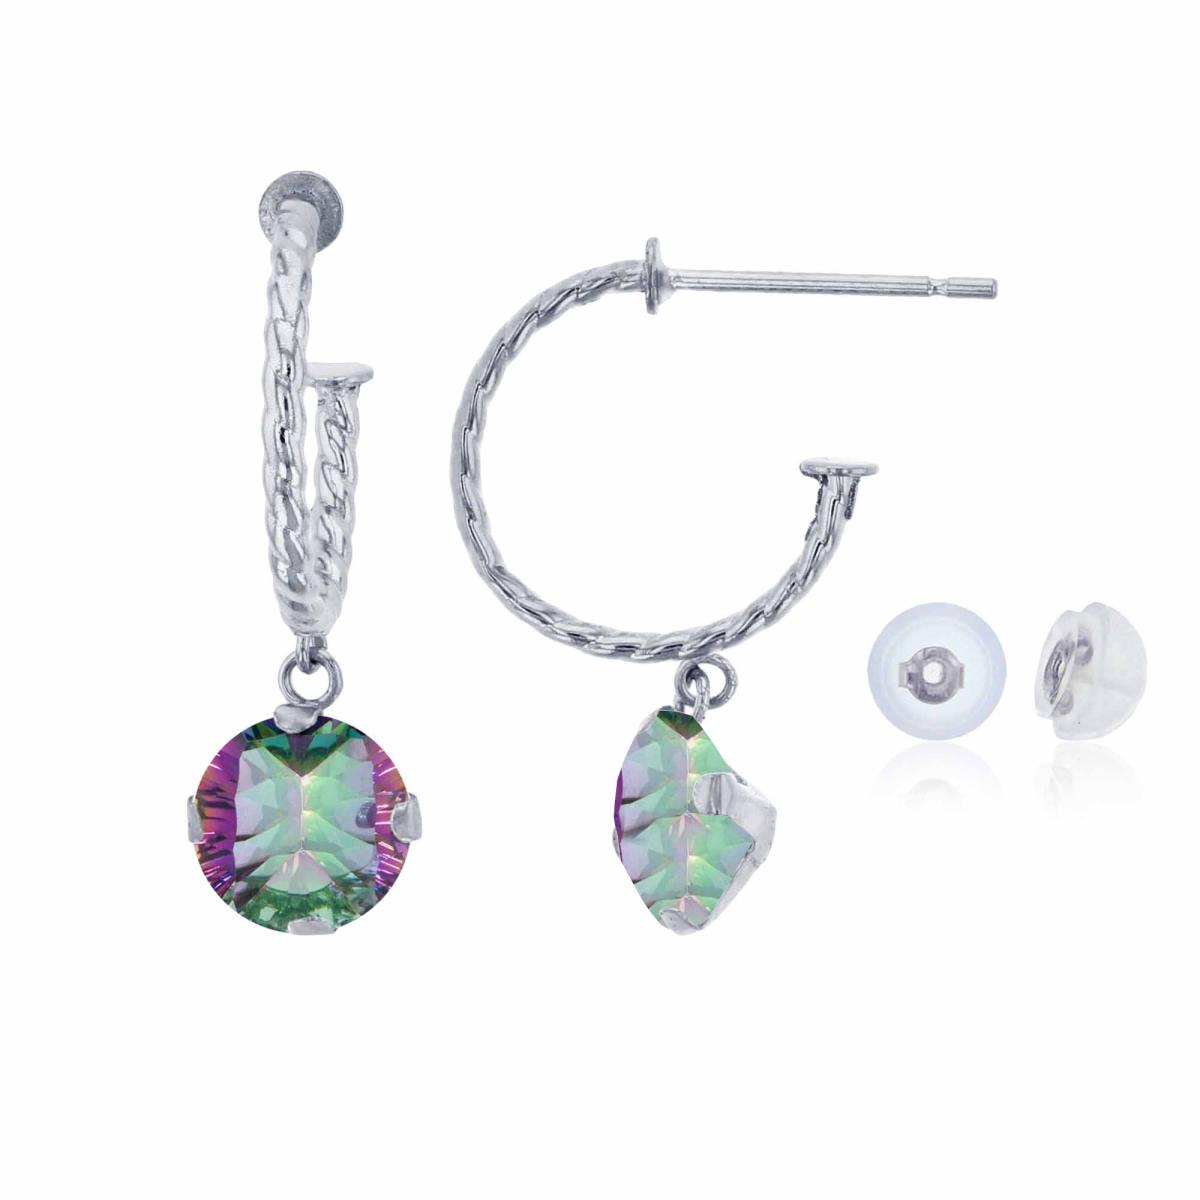 10K White Gold 12mm Rope Half-Hoop with 6mm Rd Mystic Green Topaz Martini Drop Earring with Silicone Back